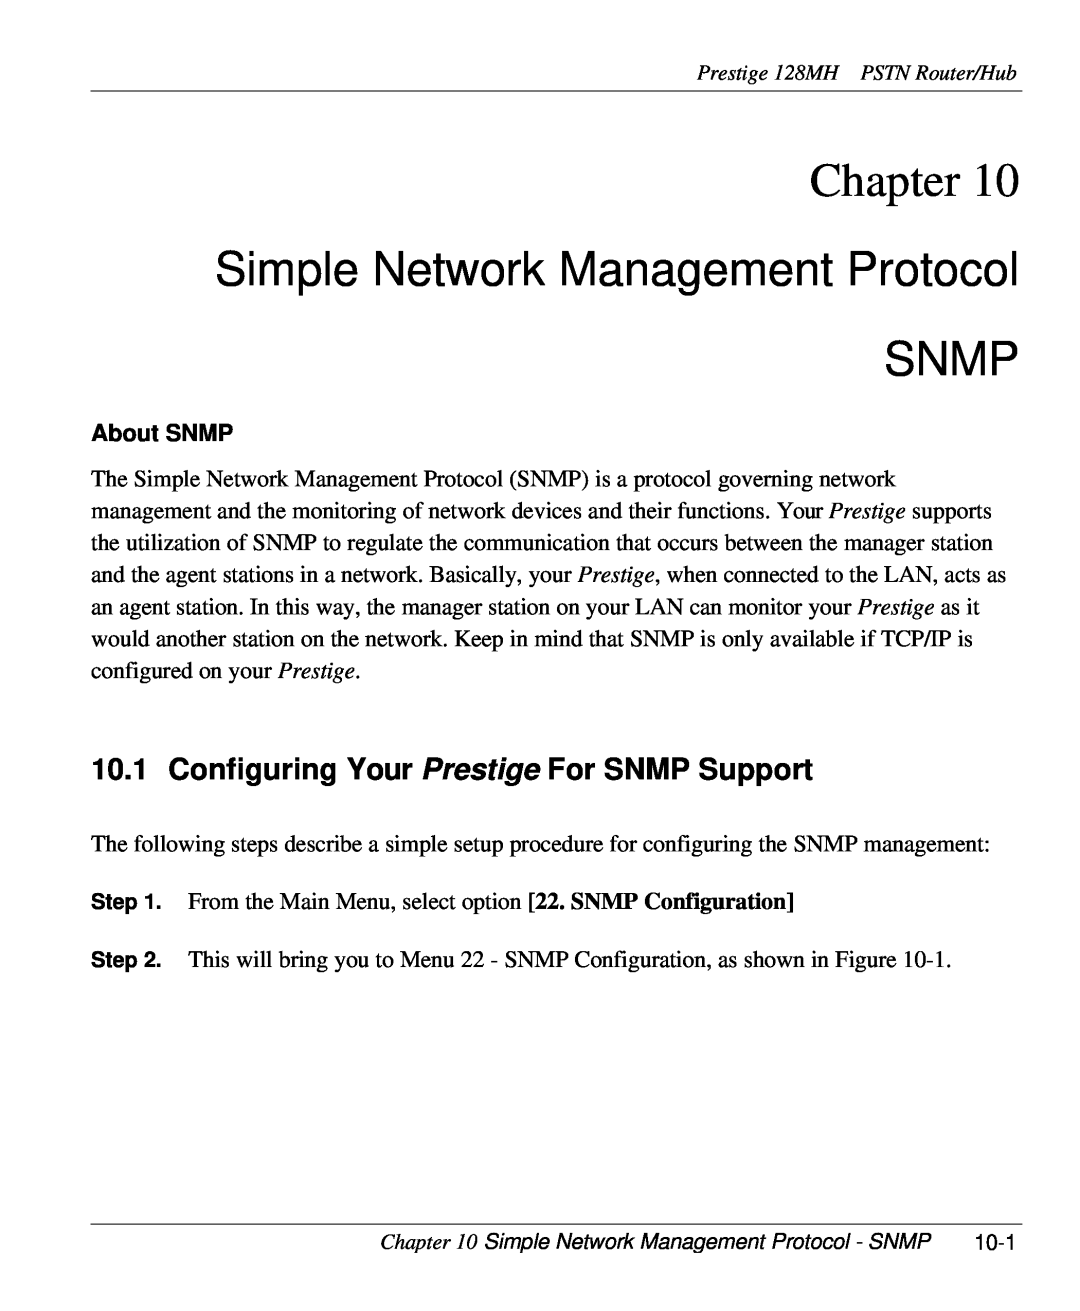 ZyXEL Communications 128MH Simple Network Management Protocol SNMP, Configuring Your Prestige For SNMP Support, About SNMP 